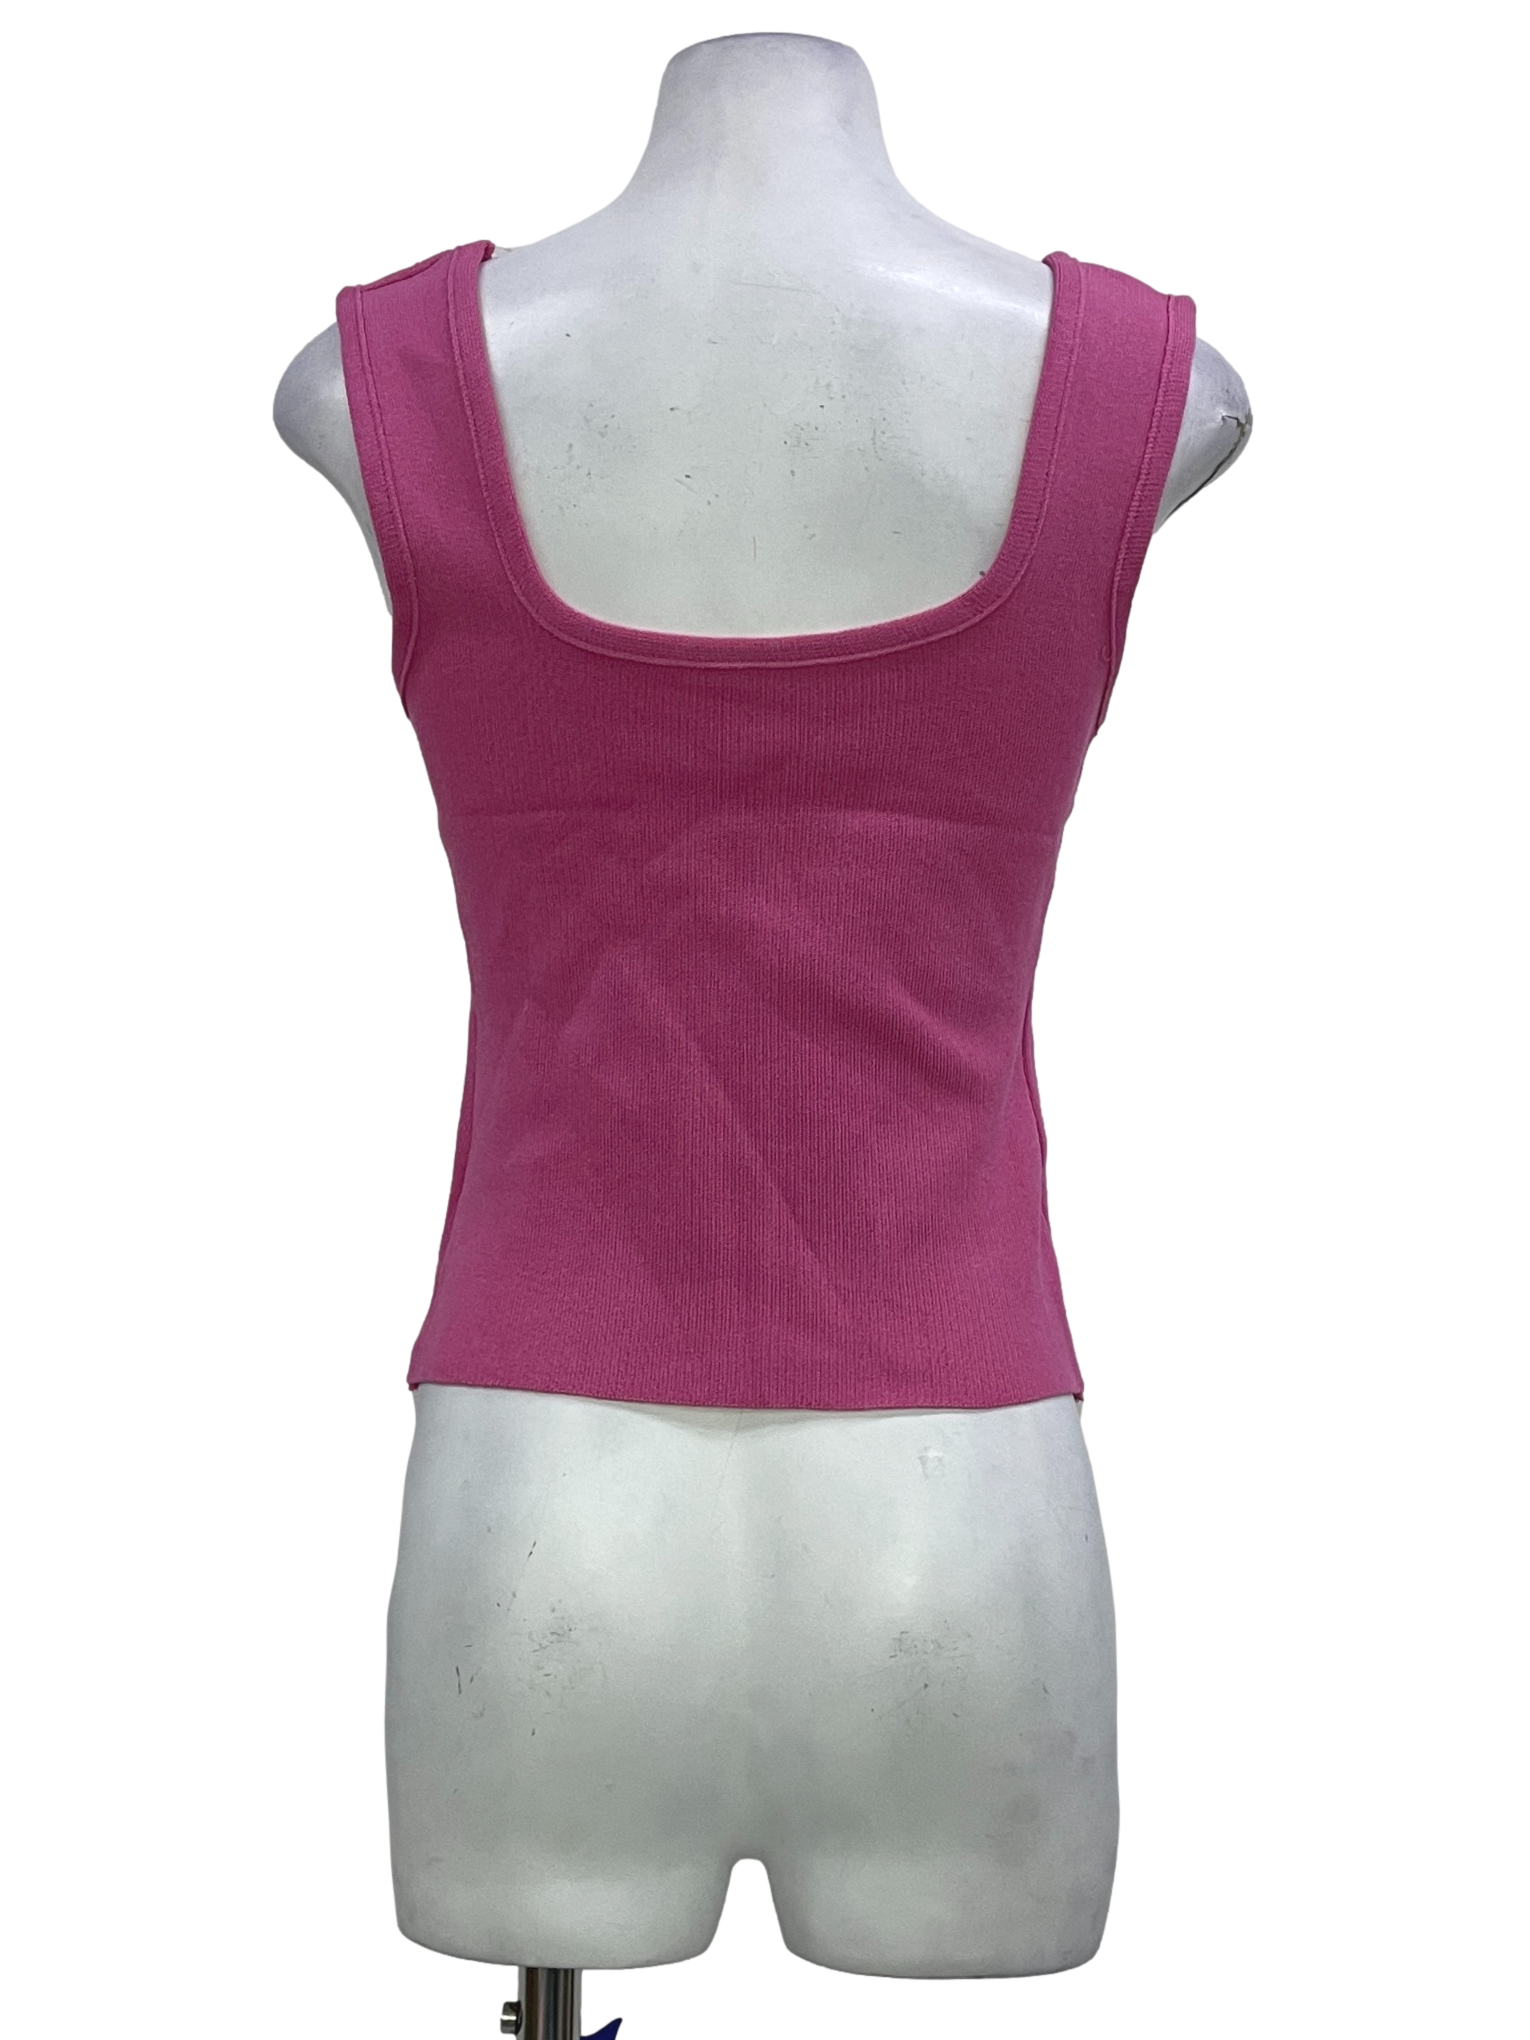 Hot Pink Square Neck Sleeveless Top